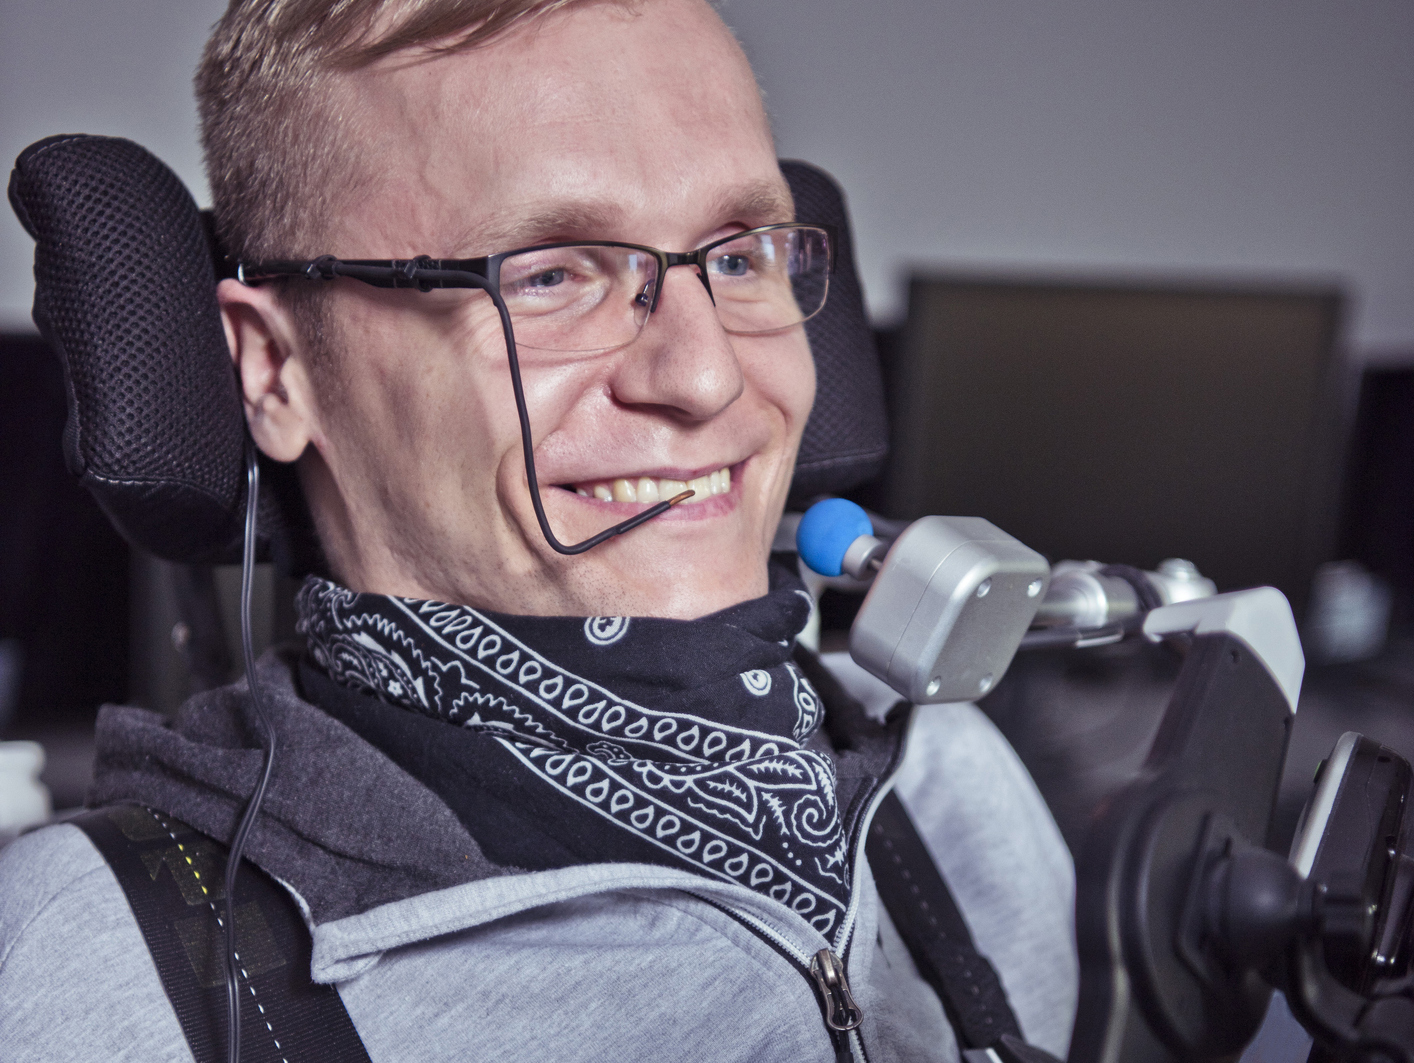 "A man with glasses seated in a wheelchair with assistive technology tools designed for accessibility smiles"